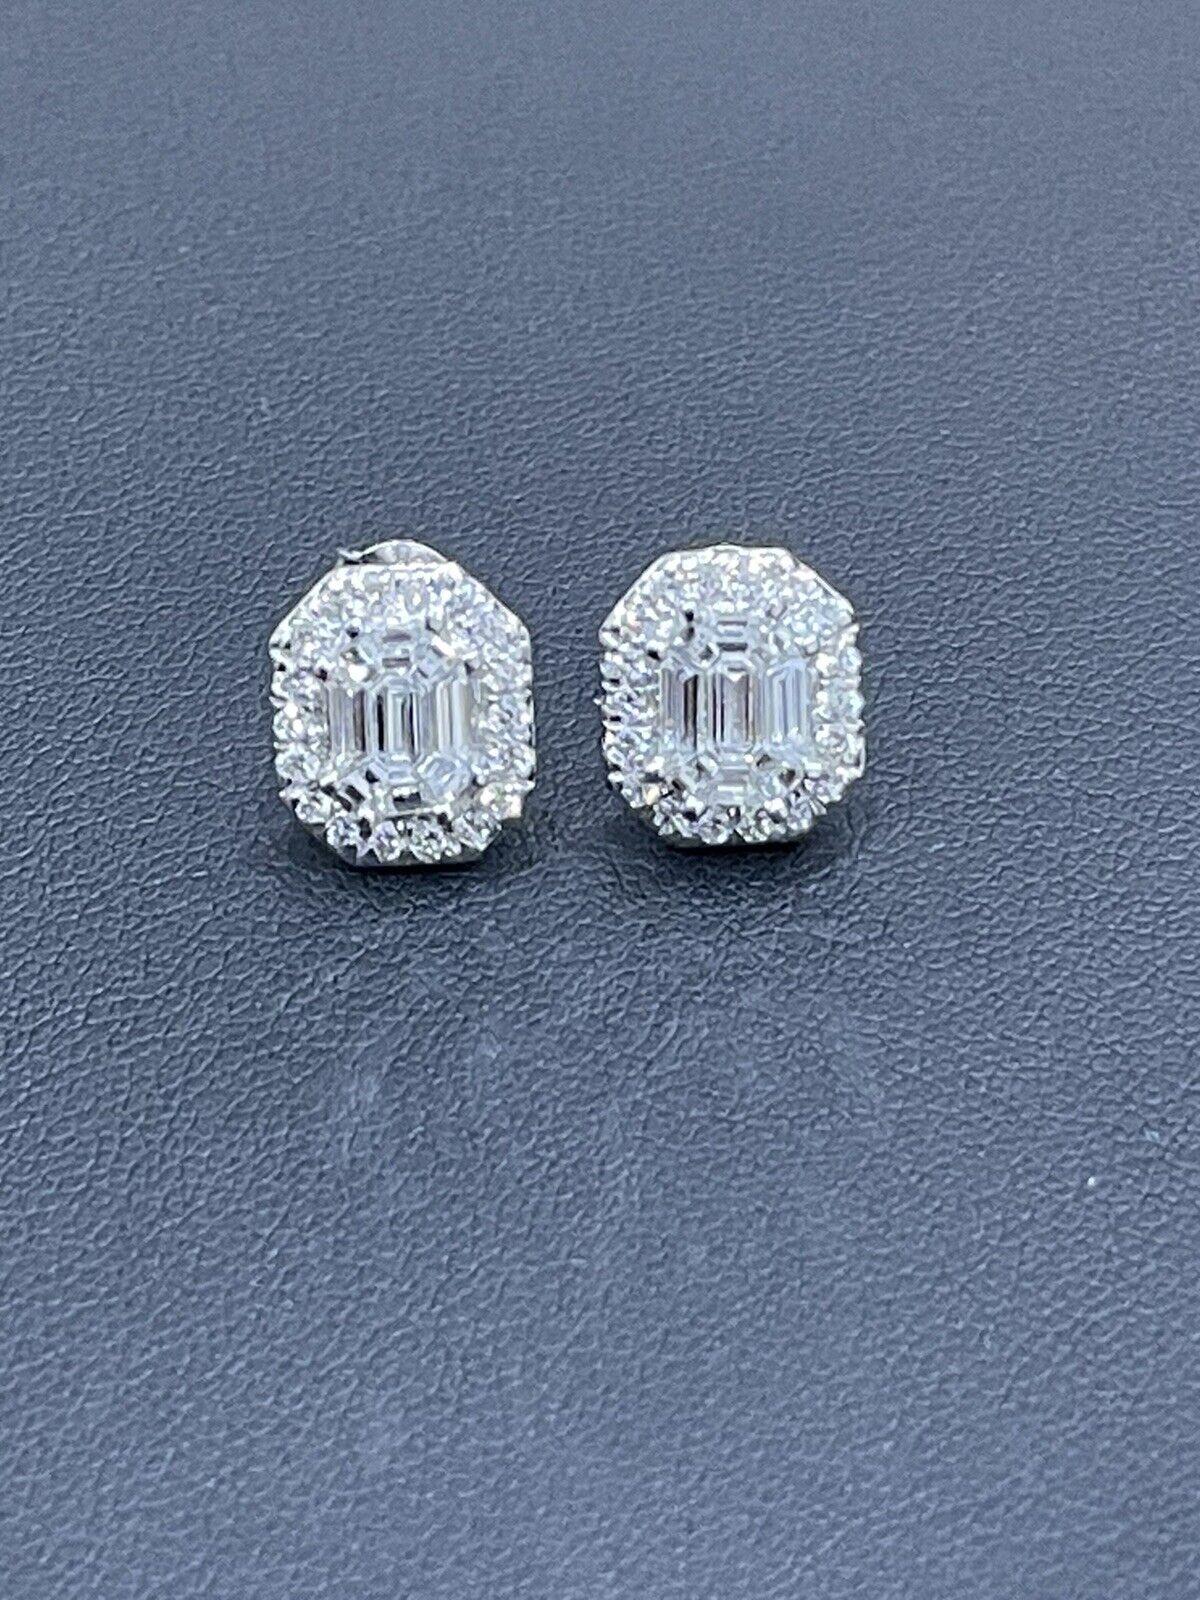 

Very elegant White gold diamond earrings where Solitaire Emerald cut diamonds are surrounded by sparkly round brilliant cut diamonds

Straight from heart of London Hatton Garden

Hallmarked 750 for gold

New with tag

1.40ct natural diamonds of VS